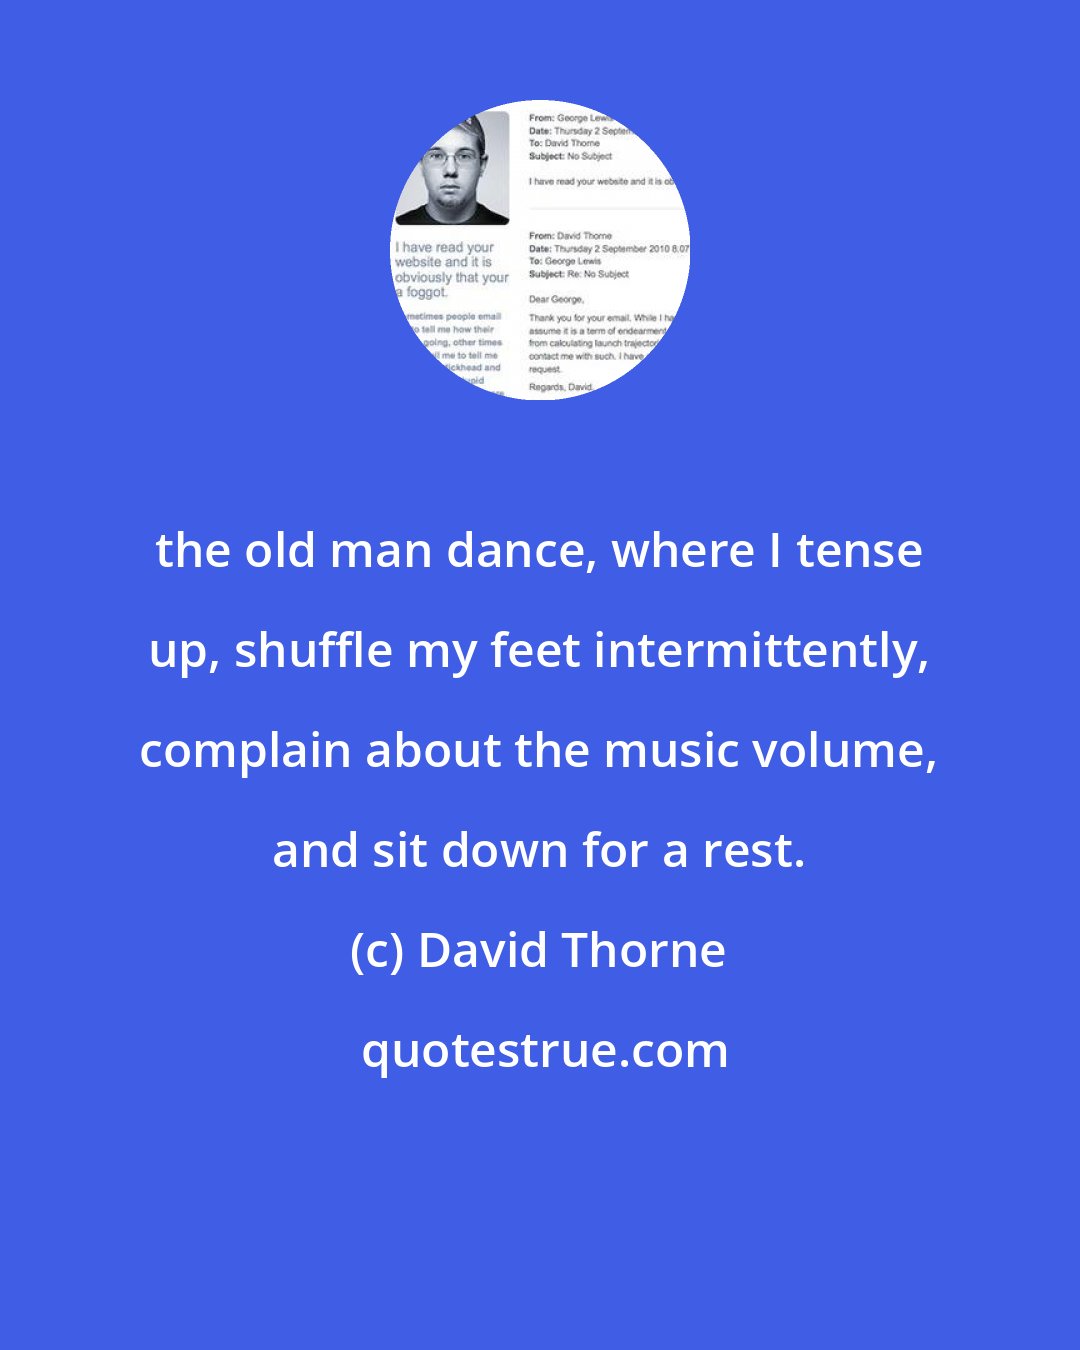 David Thorne: the old man dance, where I tense up, shuffle my feet intermittently, complain about the music volume, and sit down for a rest.